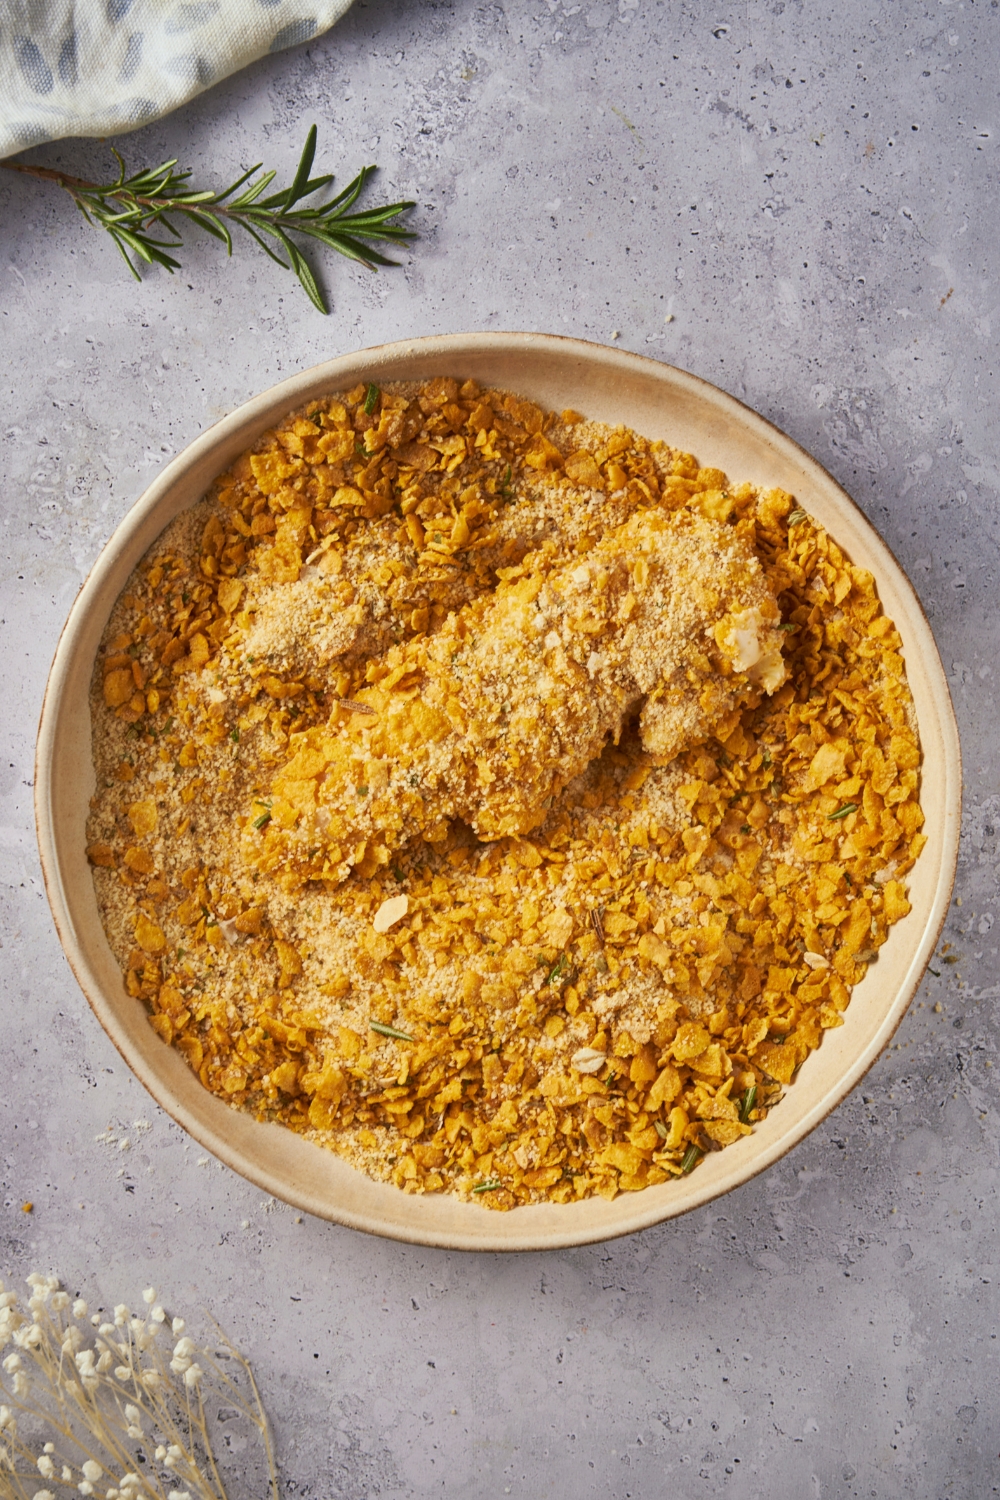 Breaded chicken tenders in a bowl filled with a mixture of cornflakes, bread crumbs and spices.